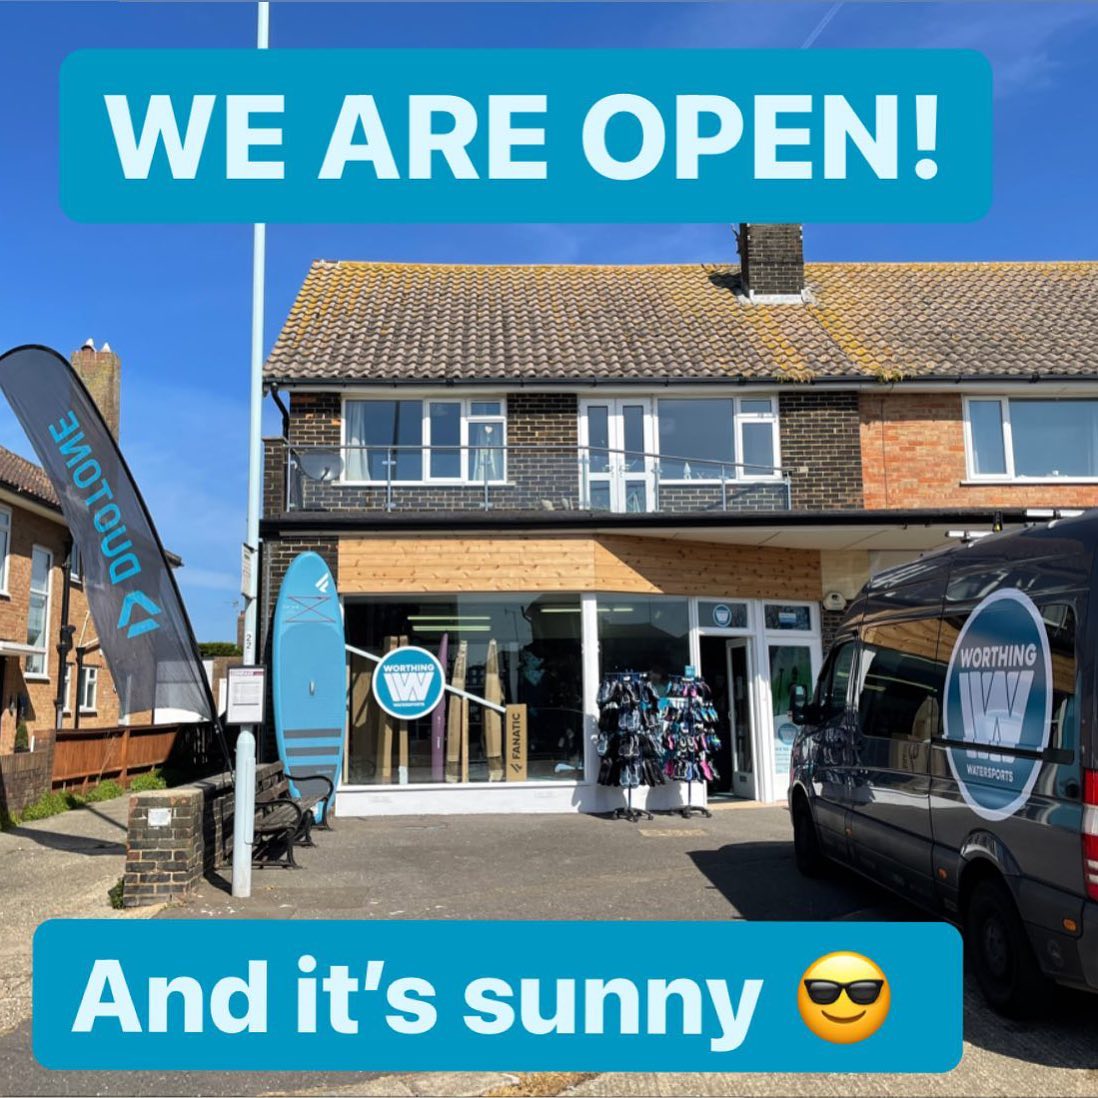 We are open! - Worthing Watersports